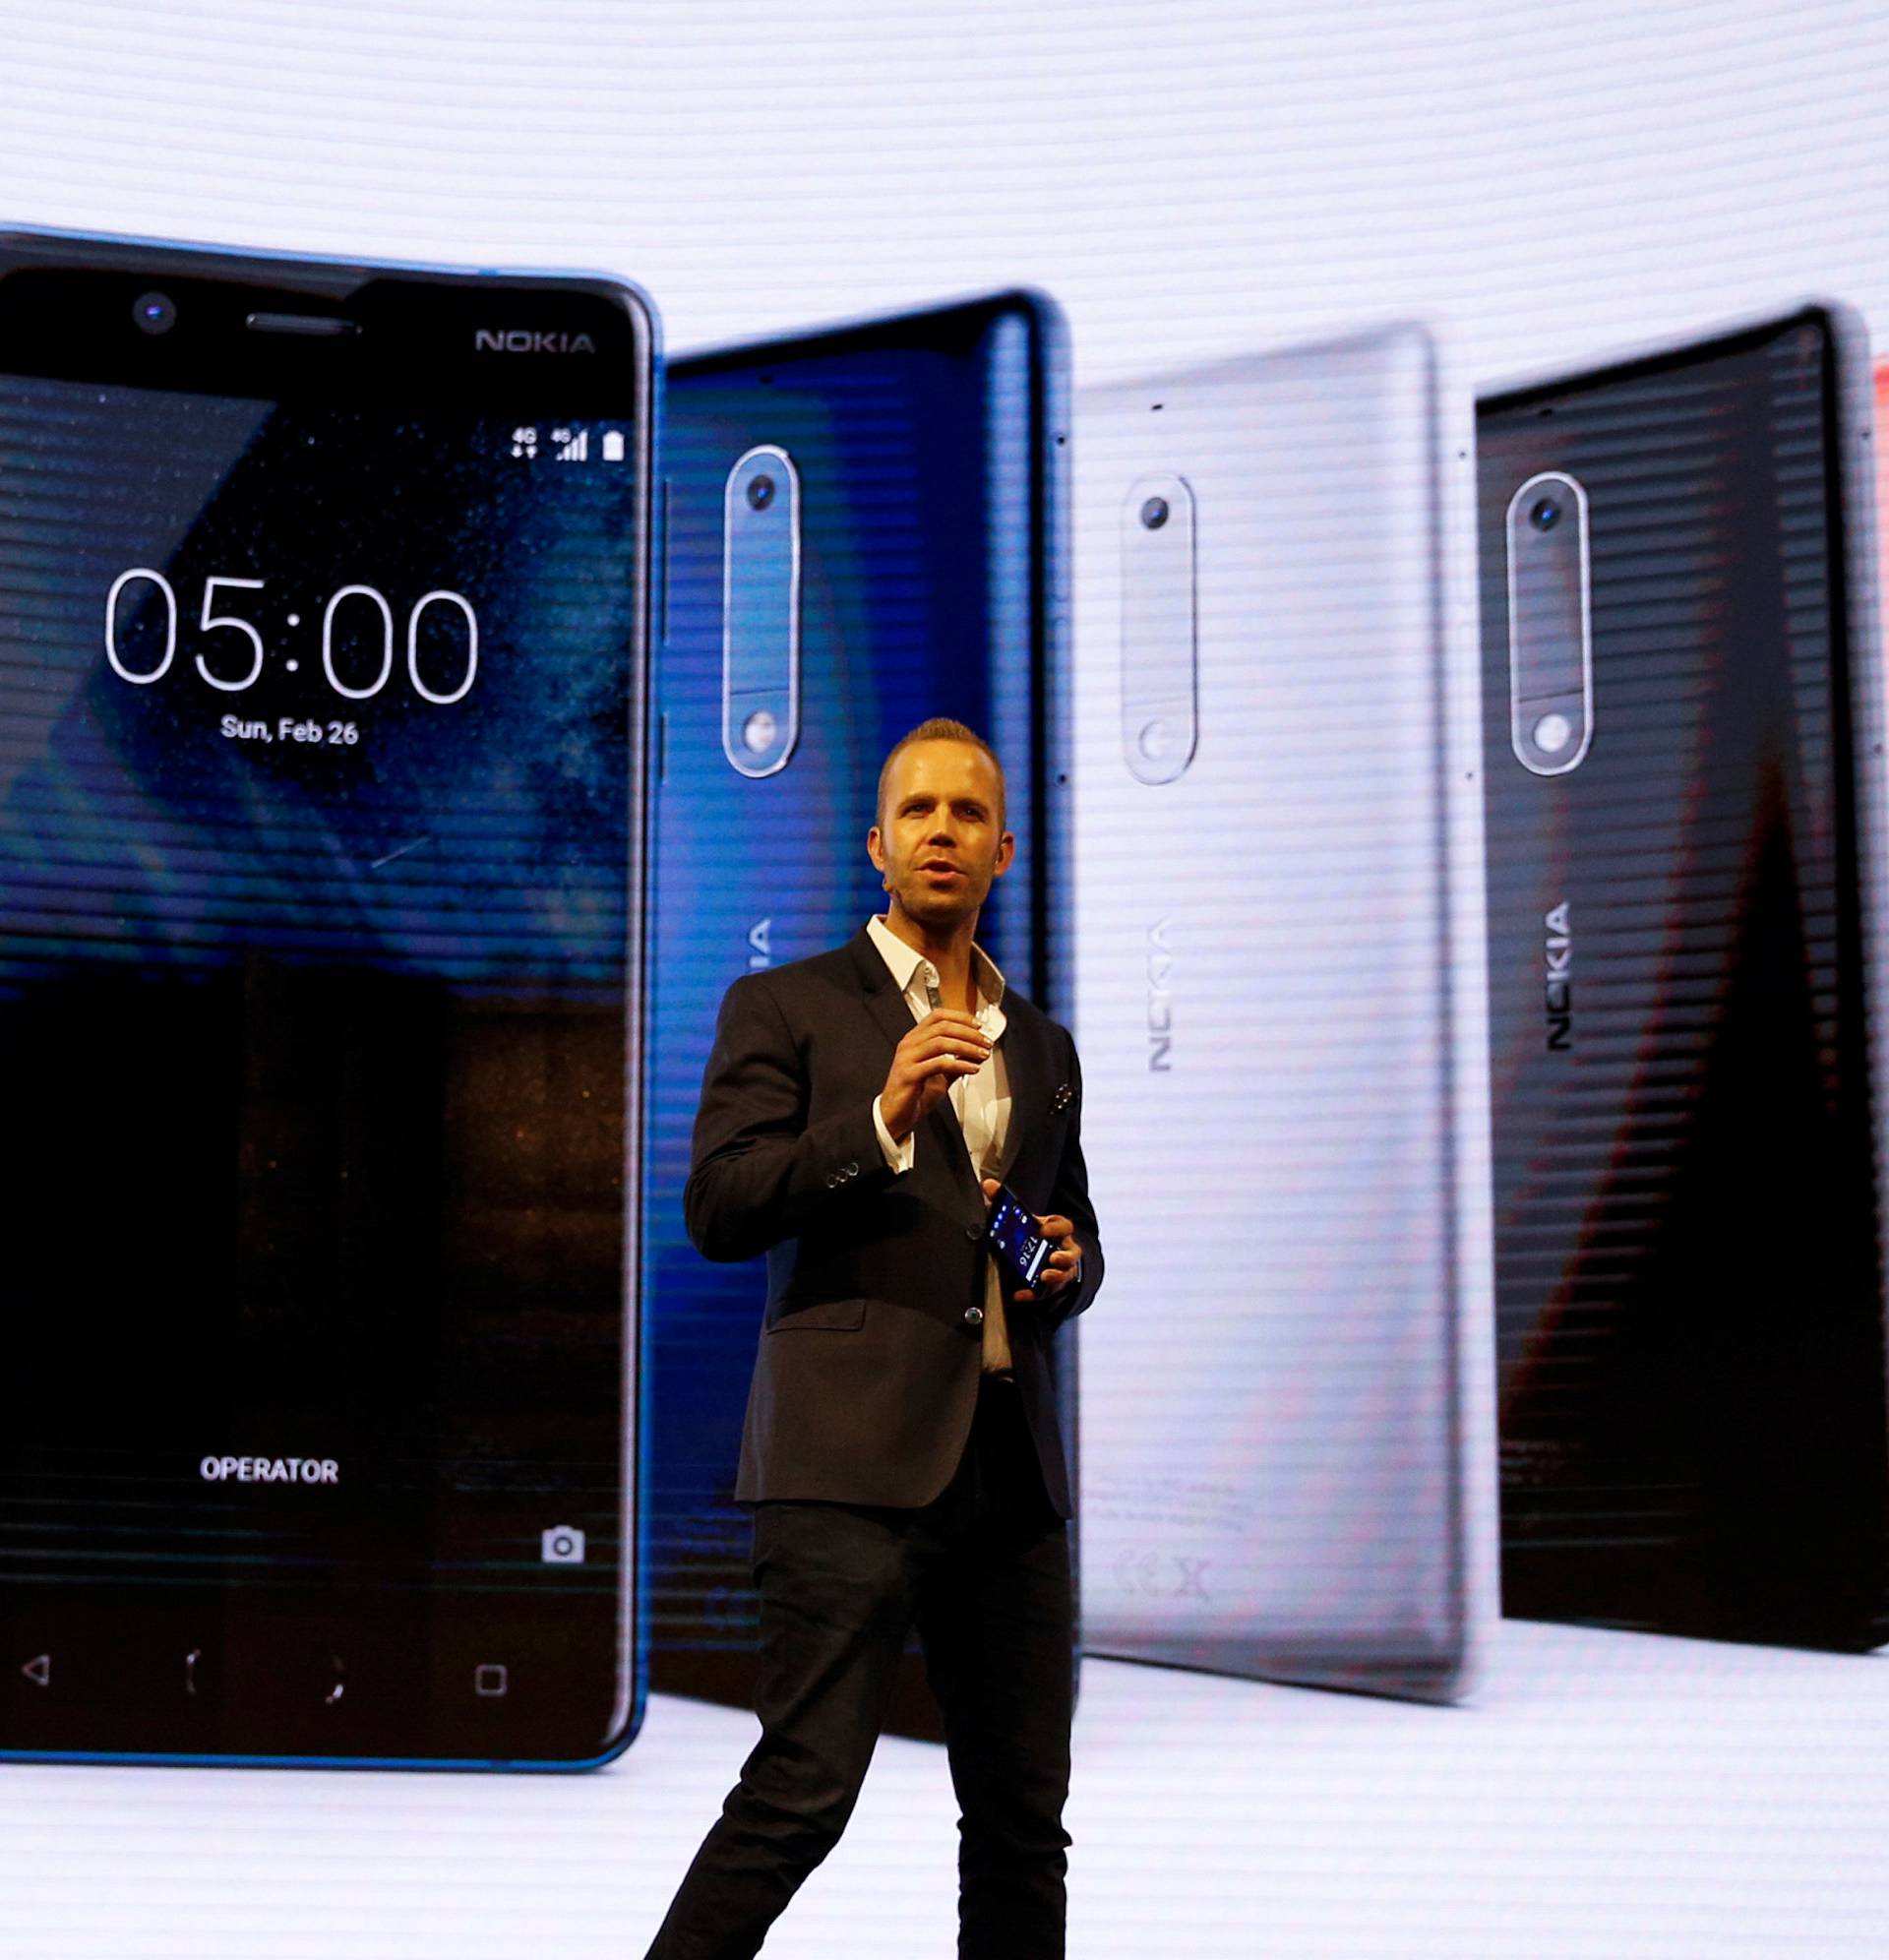 Sarvikas, Chief Product Officer of Nokia-HMD, speaks during presentation ceremony of Nokia 5 device at Mobile World Congress in Barcelona